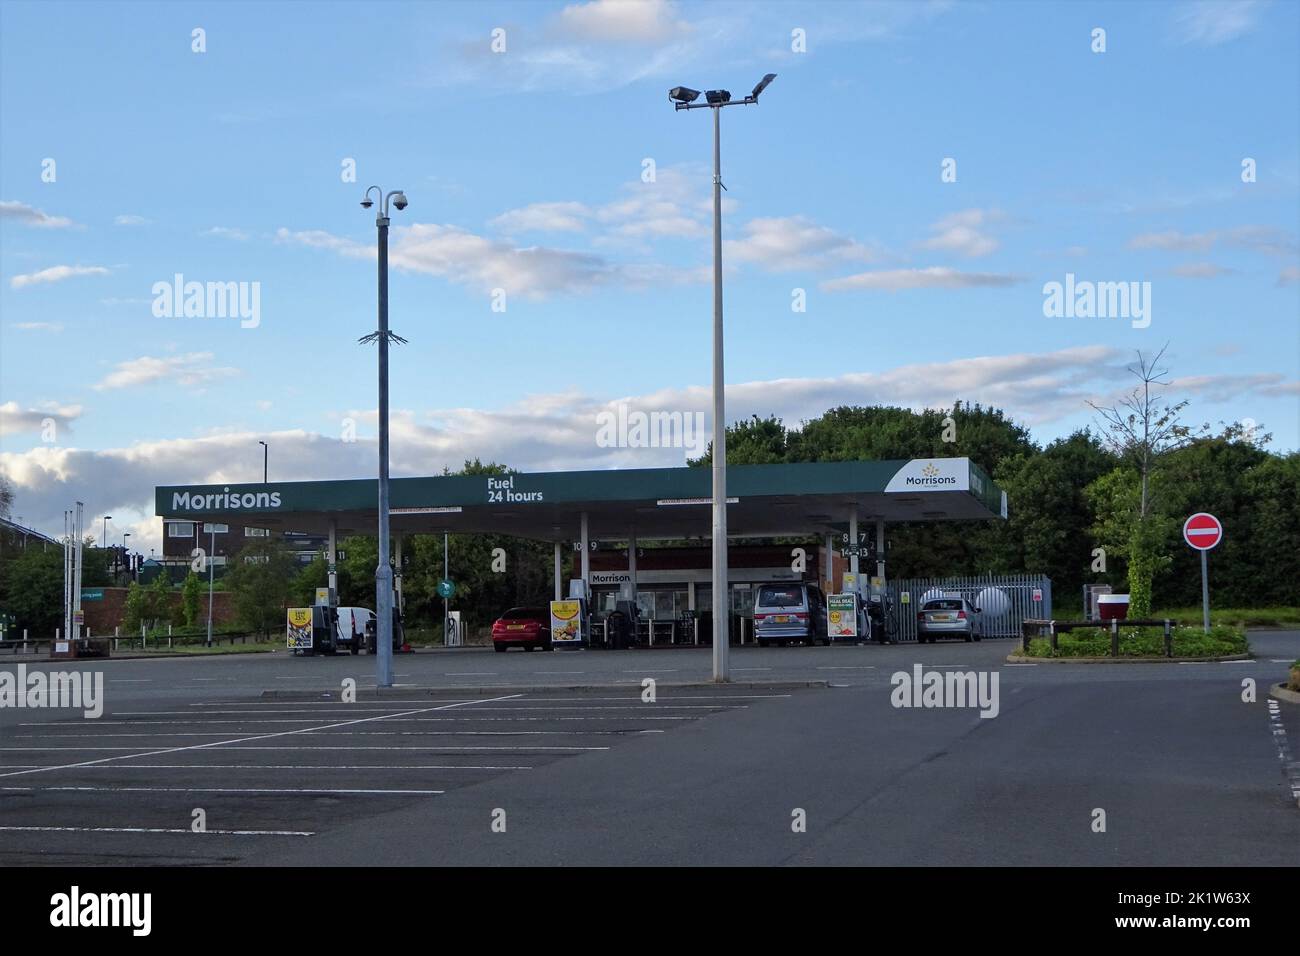 A Morrisons supermarket petrol station in the UK Stock Photo